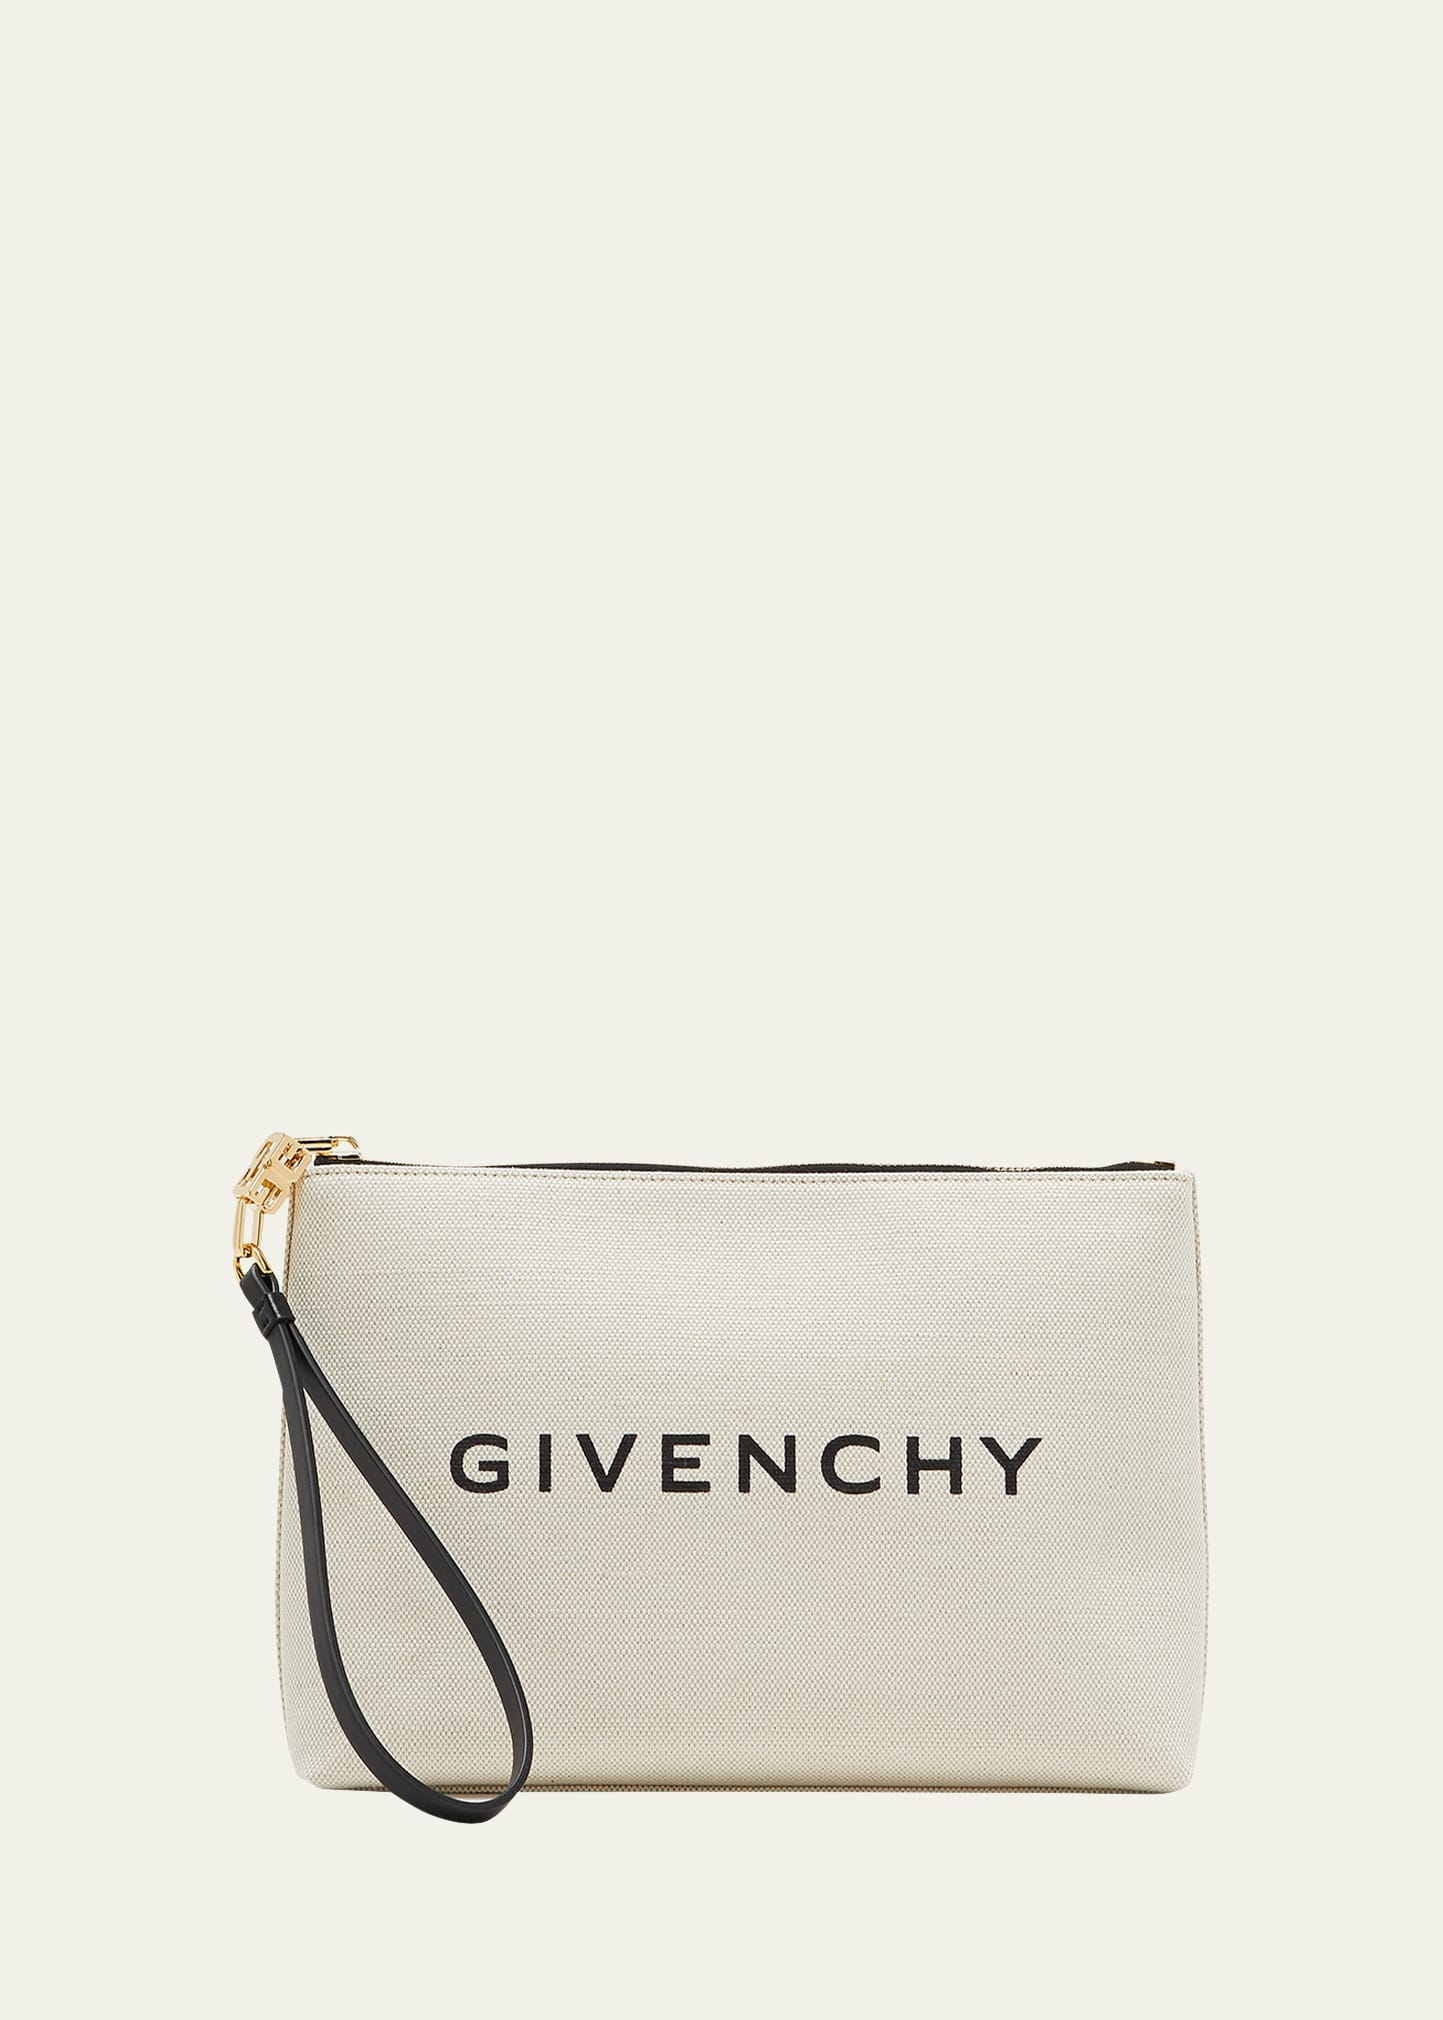 Givenchy Large Pouch Wristlet In Canvas In Beige Noir